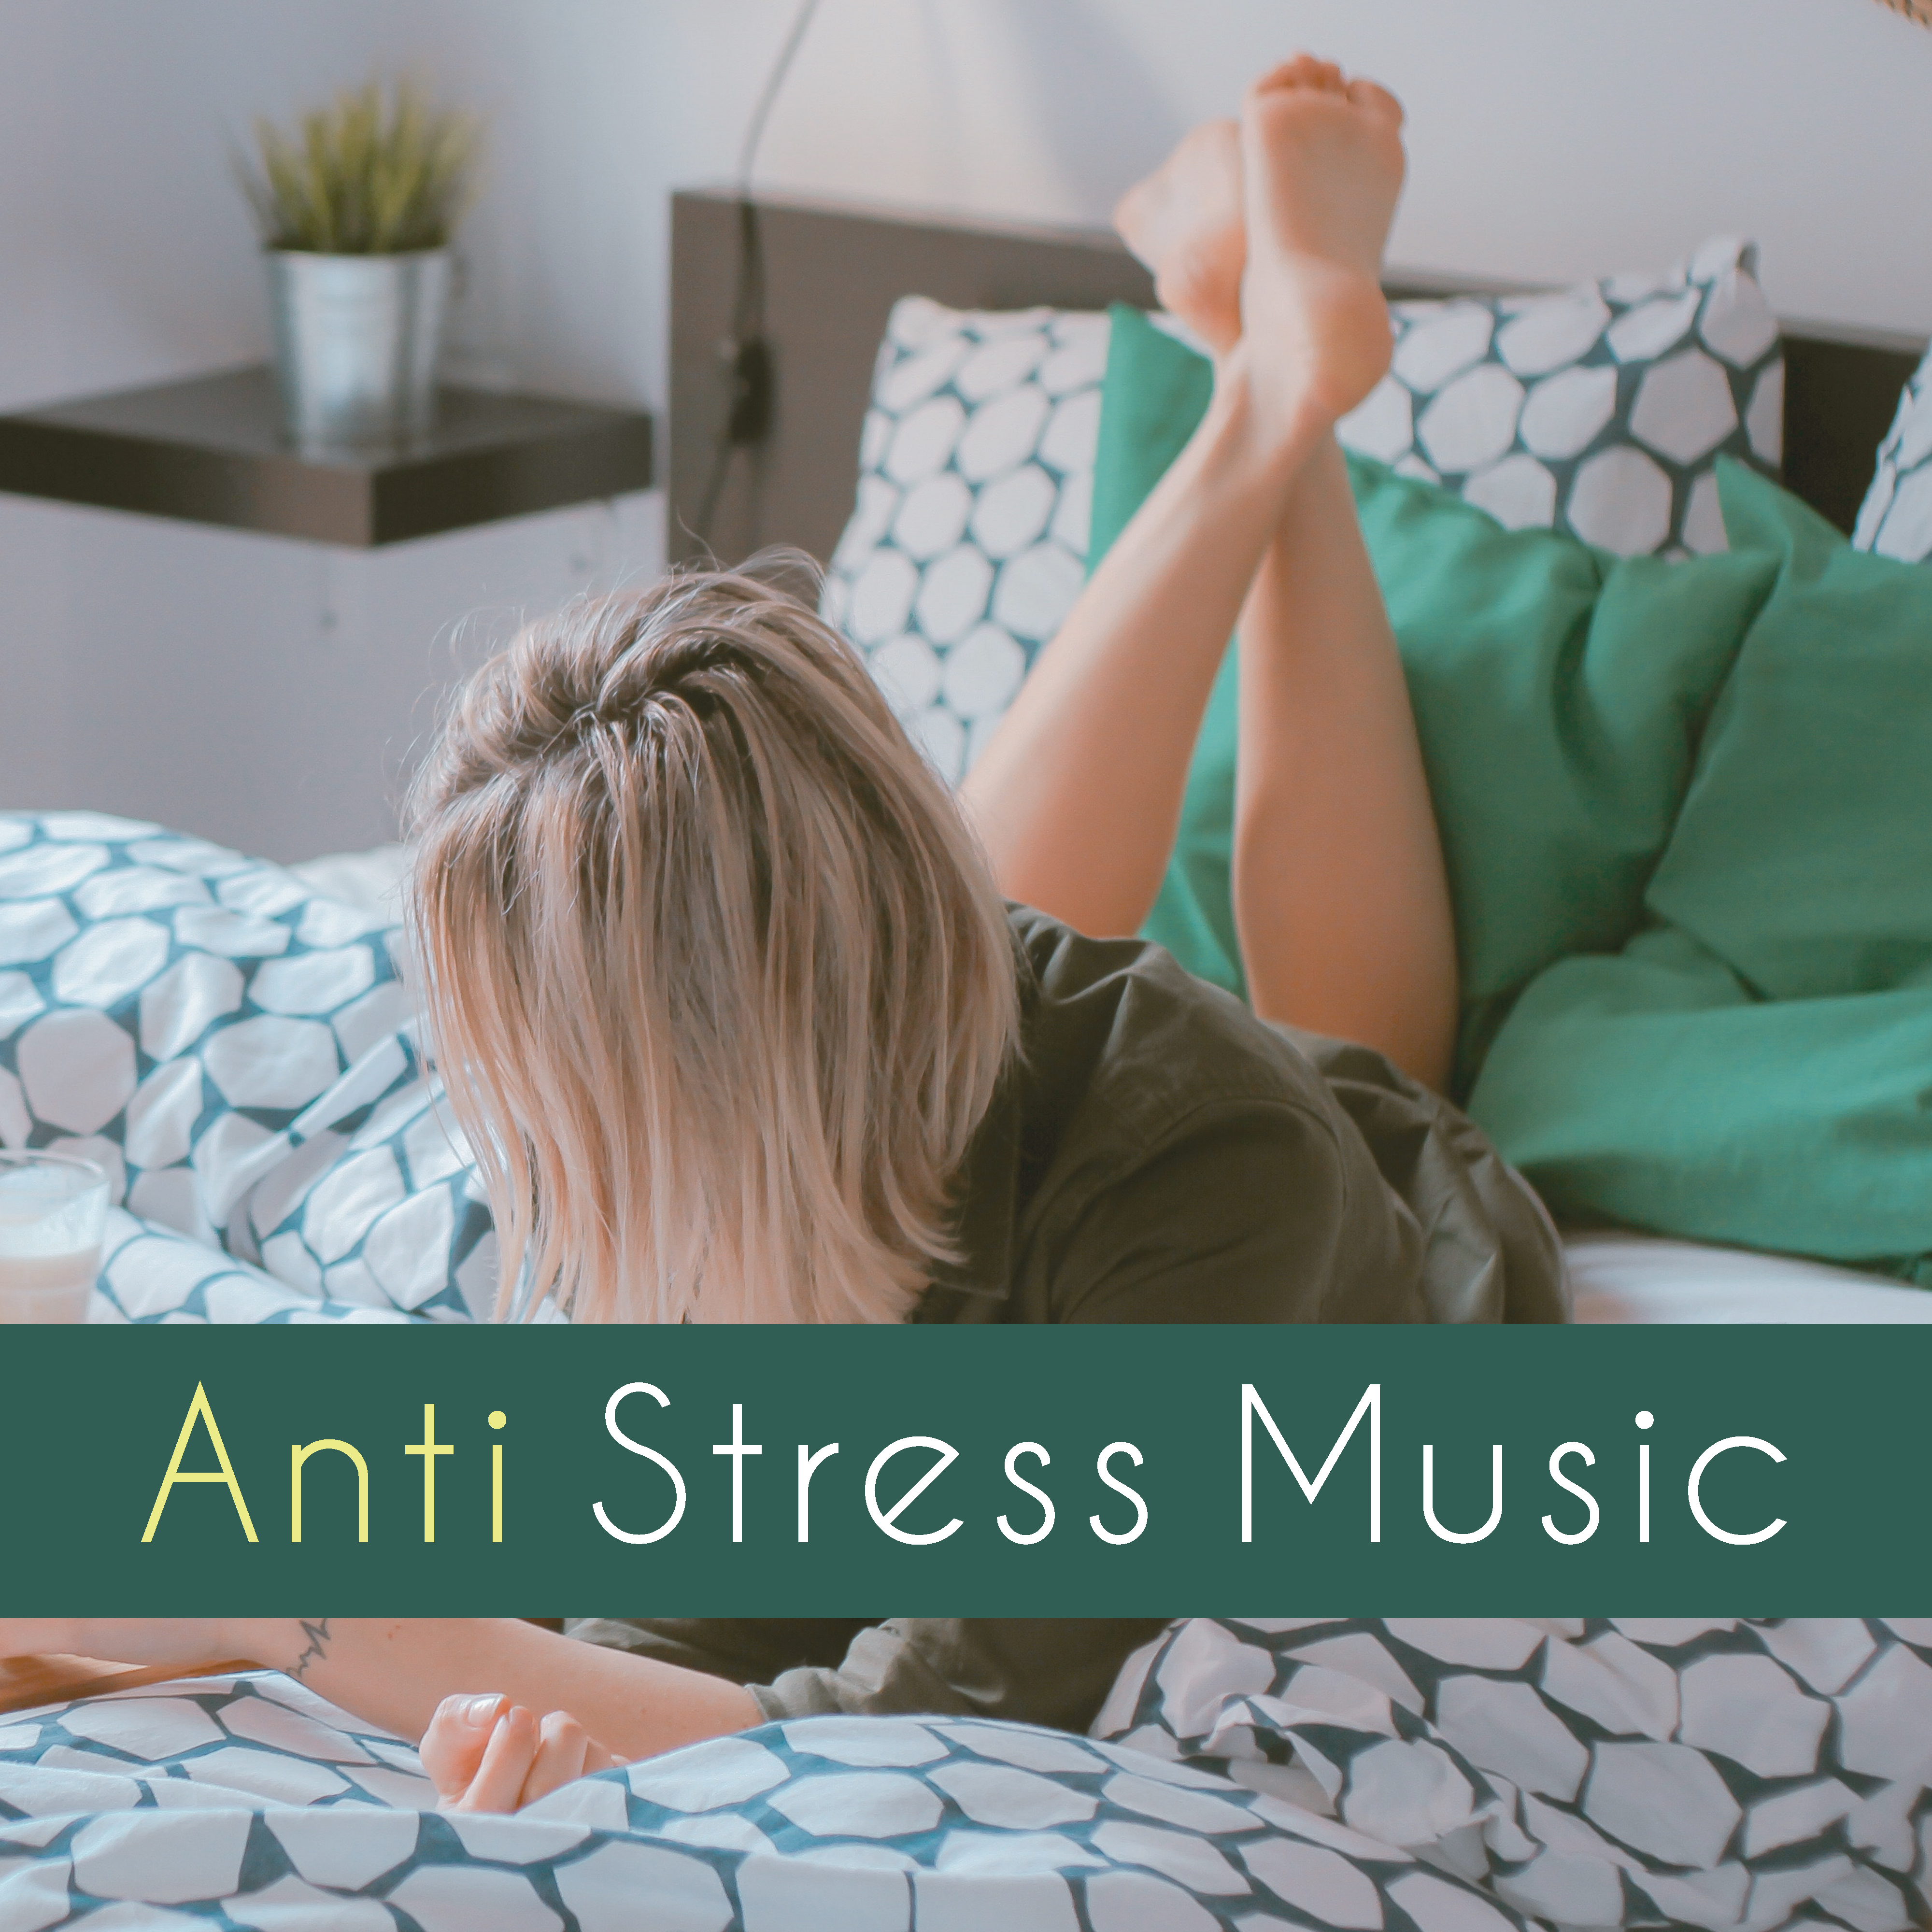 Anti Stress Music – New Age Relaxation, Tranquility, Music Therapy, Calm Down, Sensual Sounds, Zen